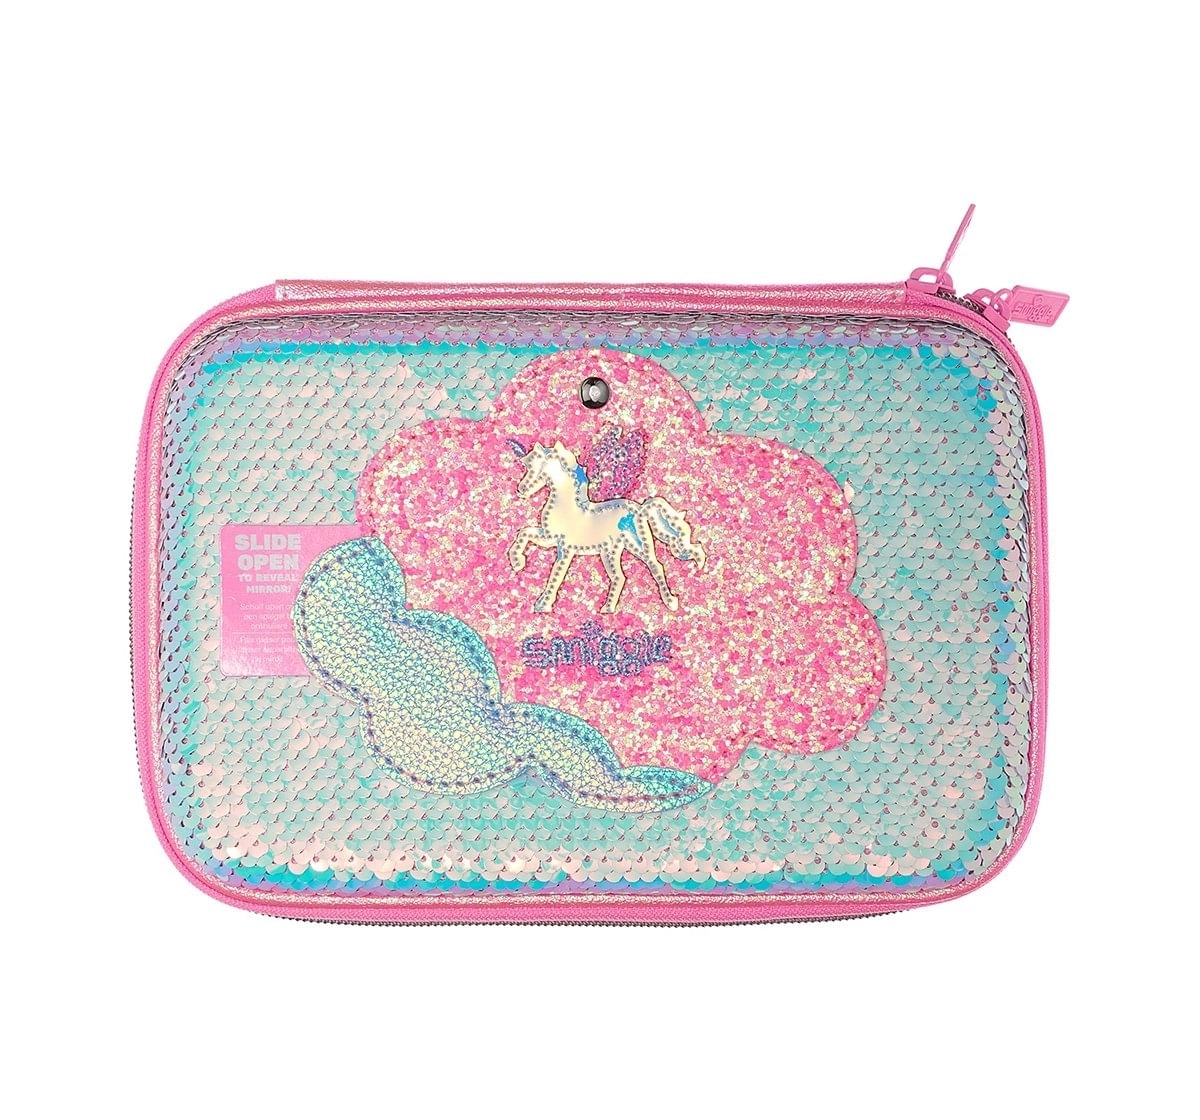  Smiggle Lunar Hardtop Pencil Case with Hidden Mirror - Unicorn Print Bags for Kids age 3Y+ (Pink)